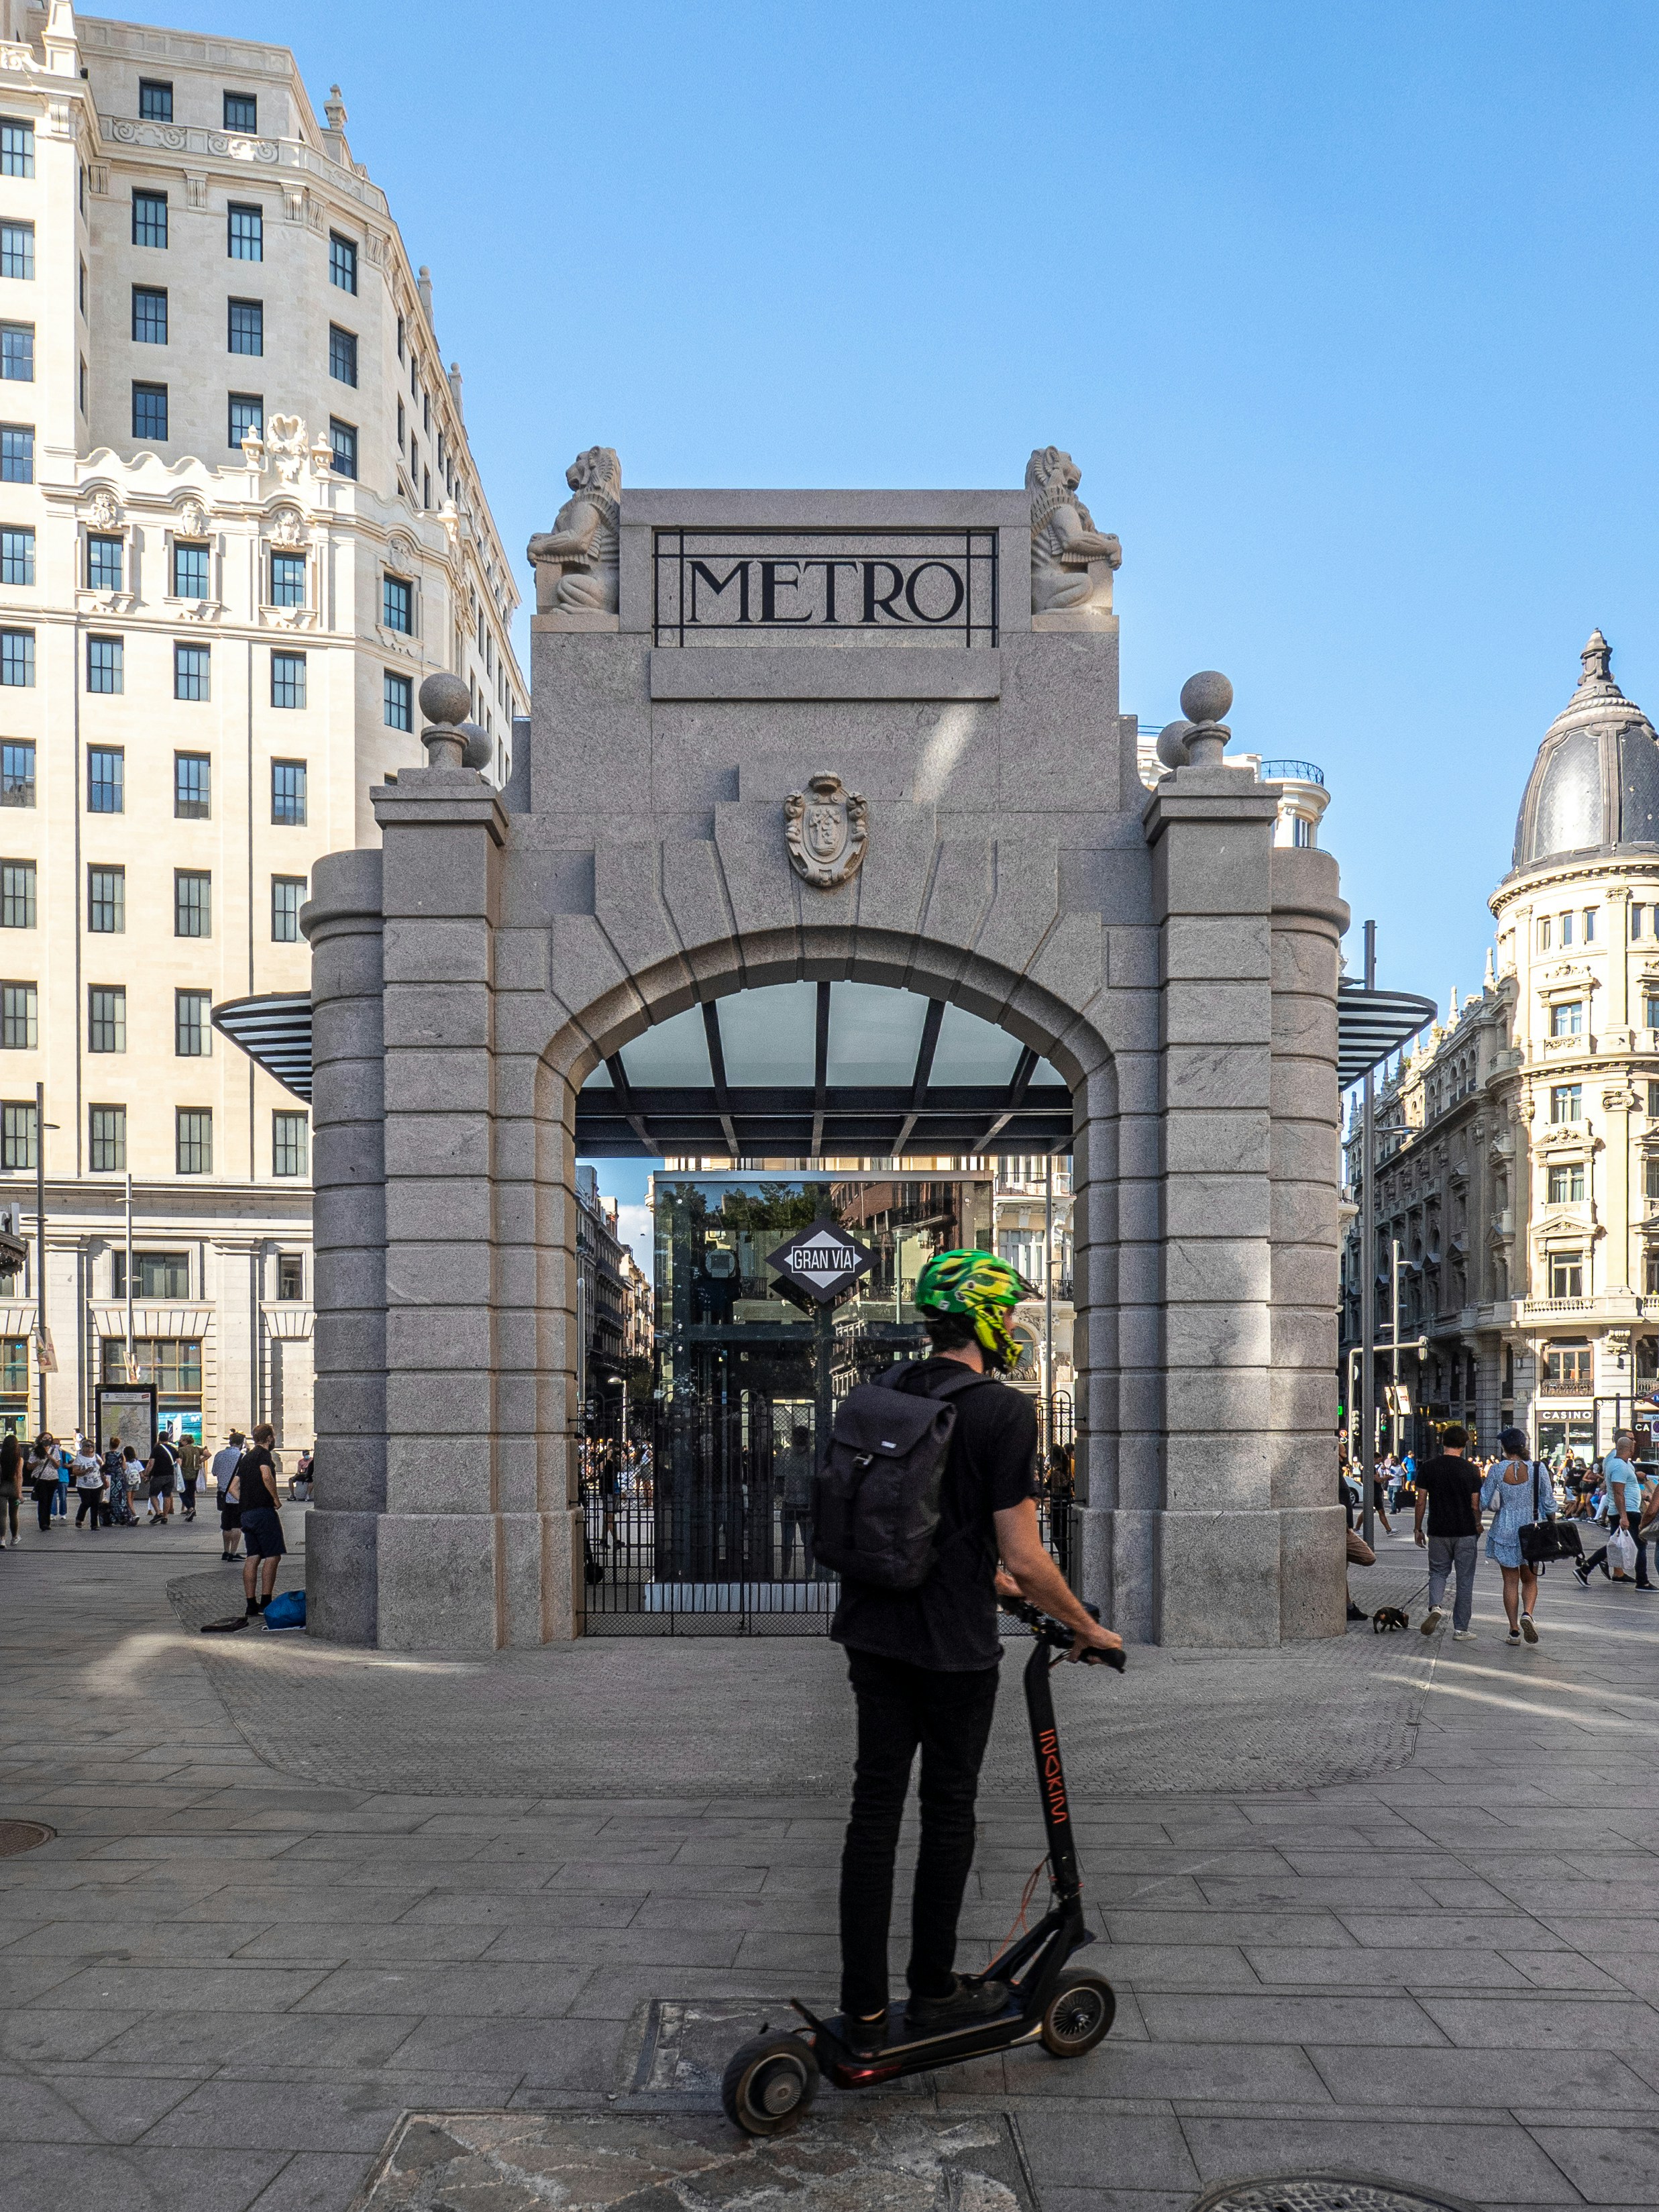 Gran Vía Metro entrance in downtown Madrid. Pavilion designed by Antonio Palacios in 1920. It was demolished in 1970 for an extension of the Madrid subway and now rebuilt in 2021.